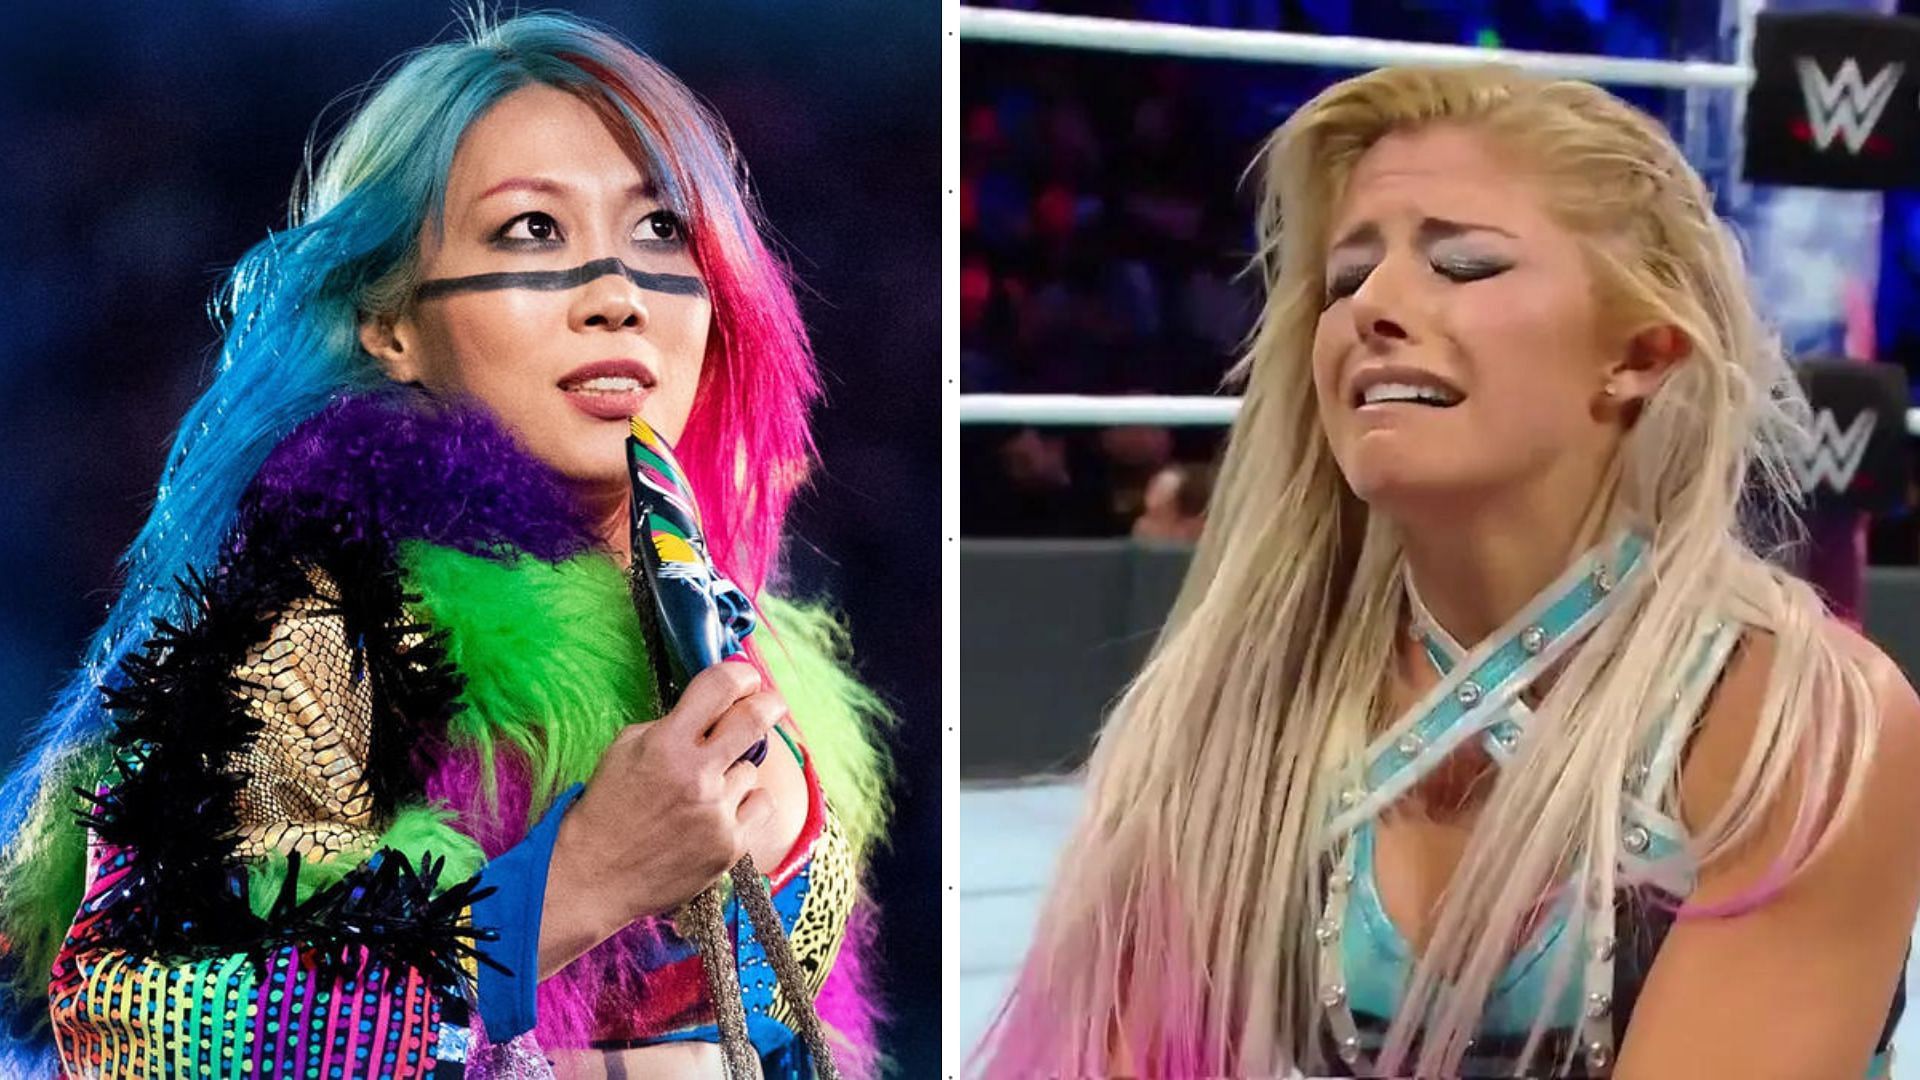 Alexa Bliss and Asuka have been a tag team on RAW